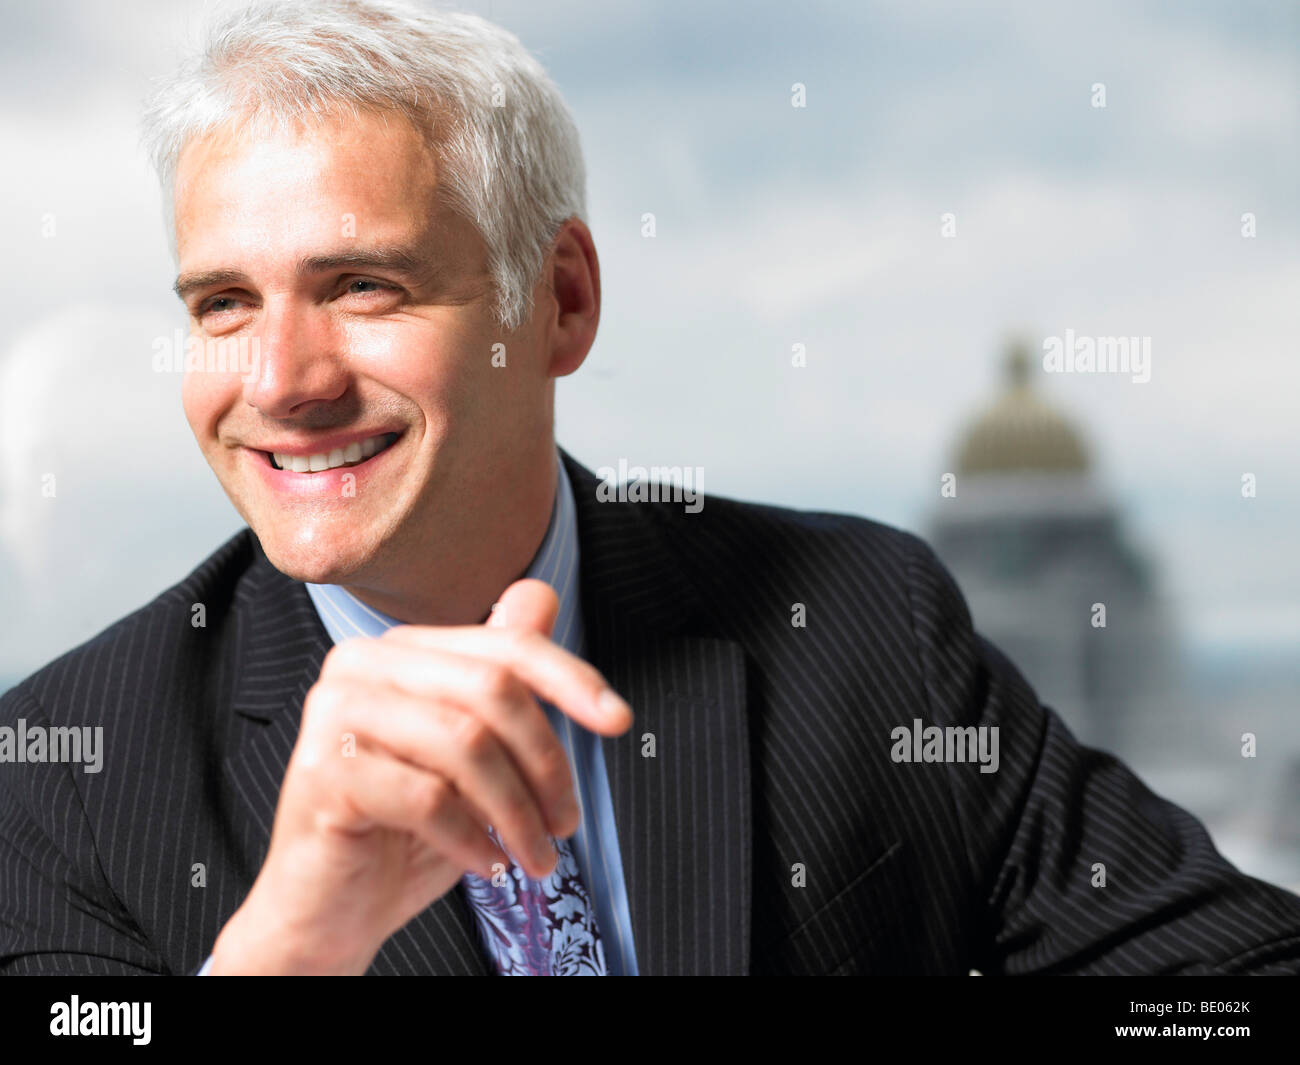 Business man smiling Stock Photo